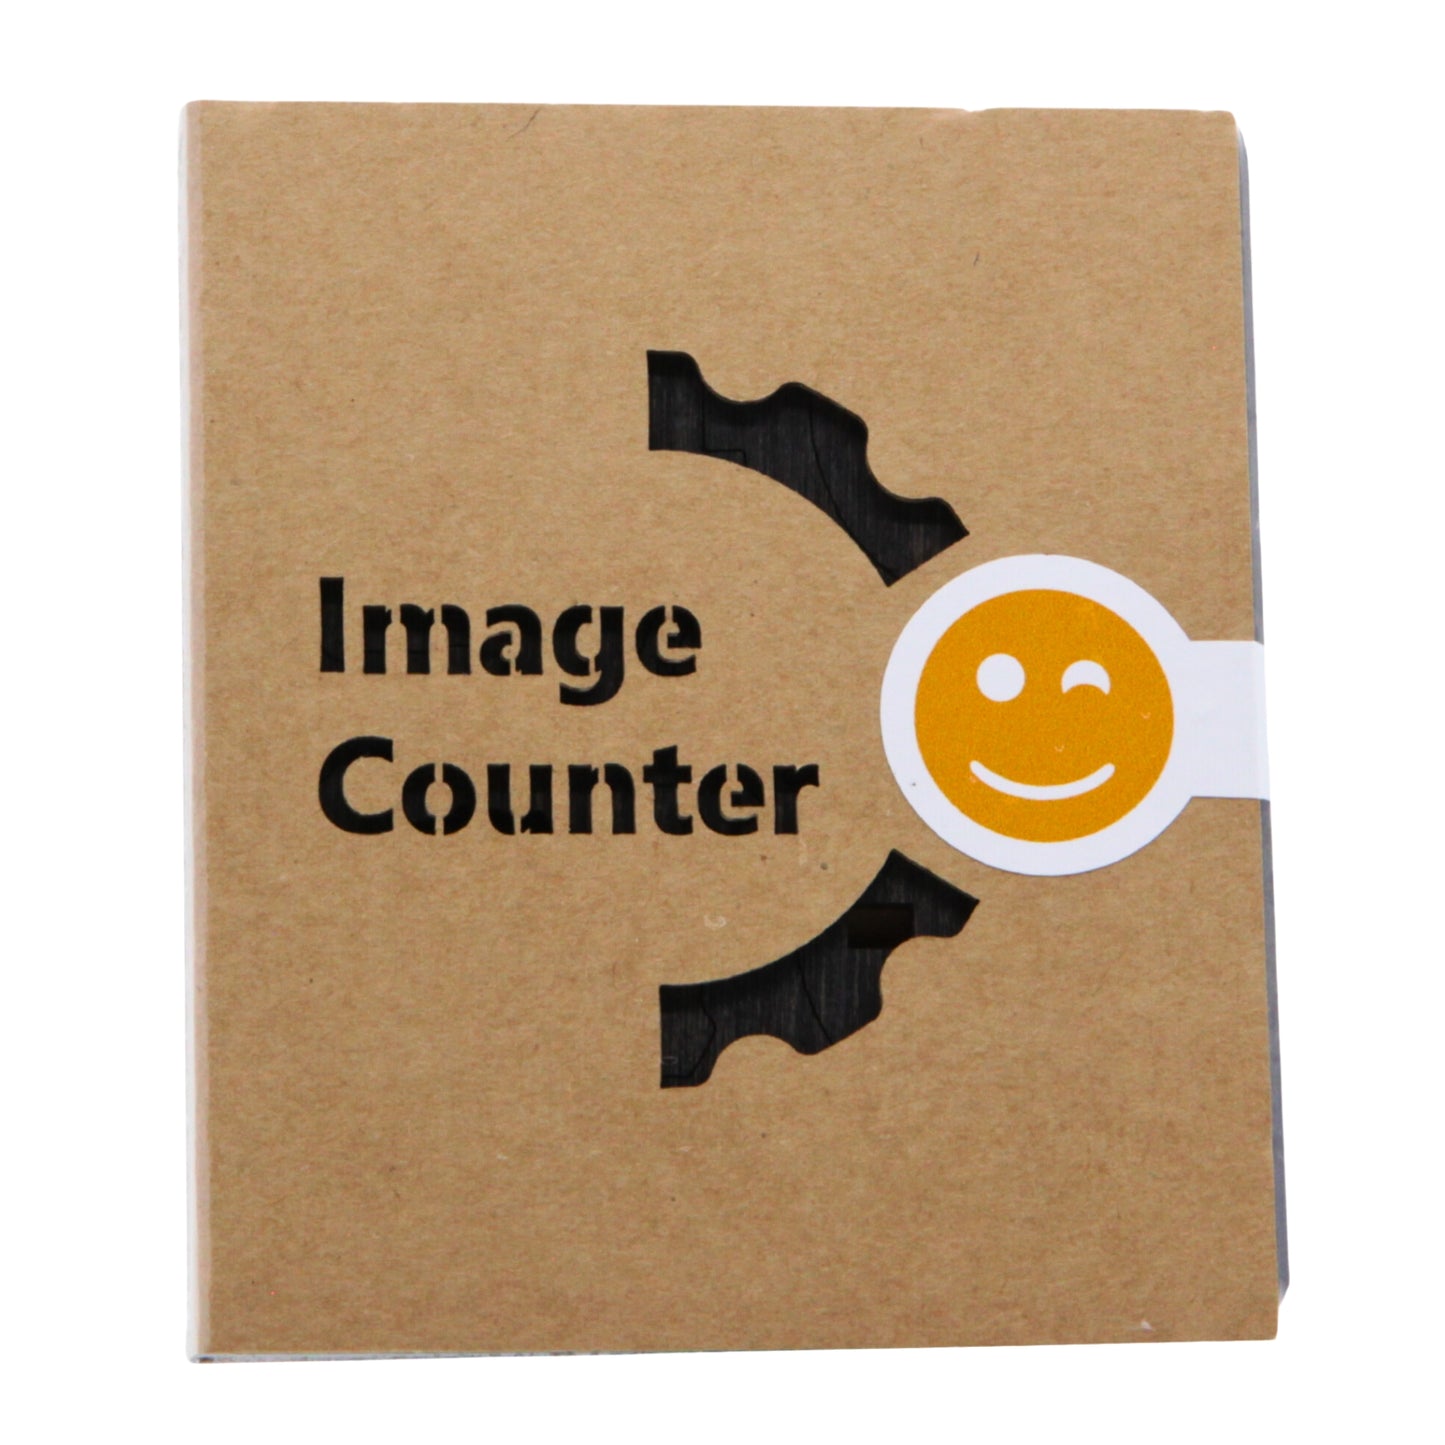 Packed unassembled round wooden image counter in Stained Brown Color featuring the Jollylook logo for keeping track of how many images remain in your Instax film cartridge